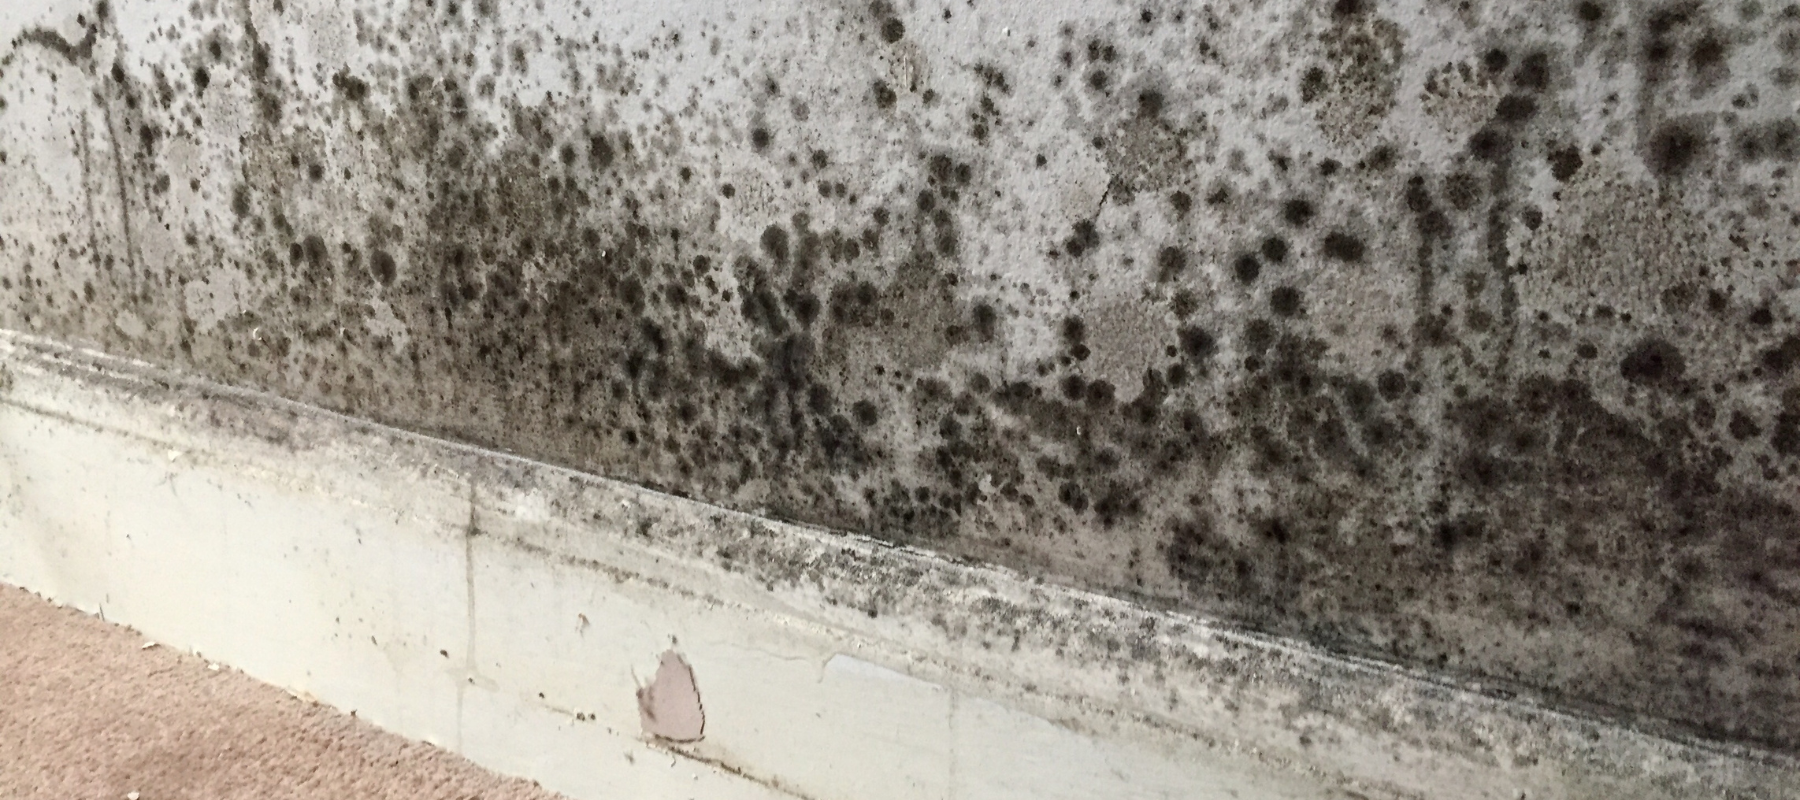 How Do I Remove Mould And Mildew After A Flood Damaged My Home?